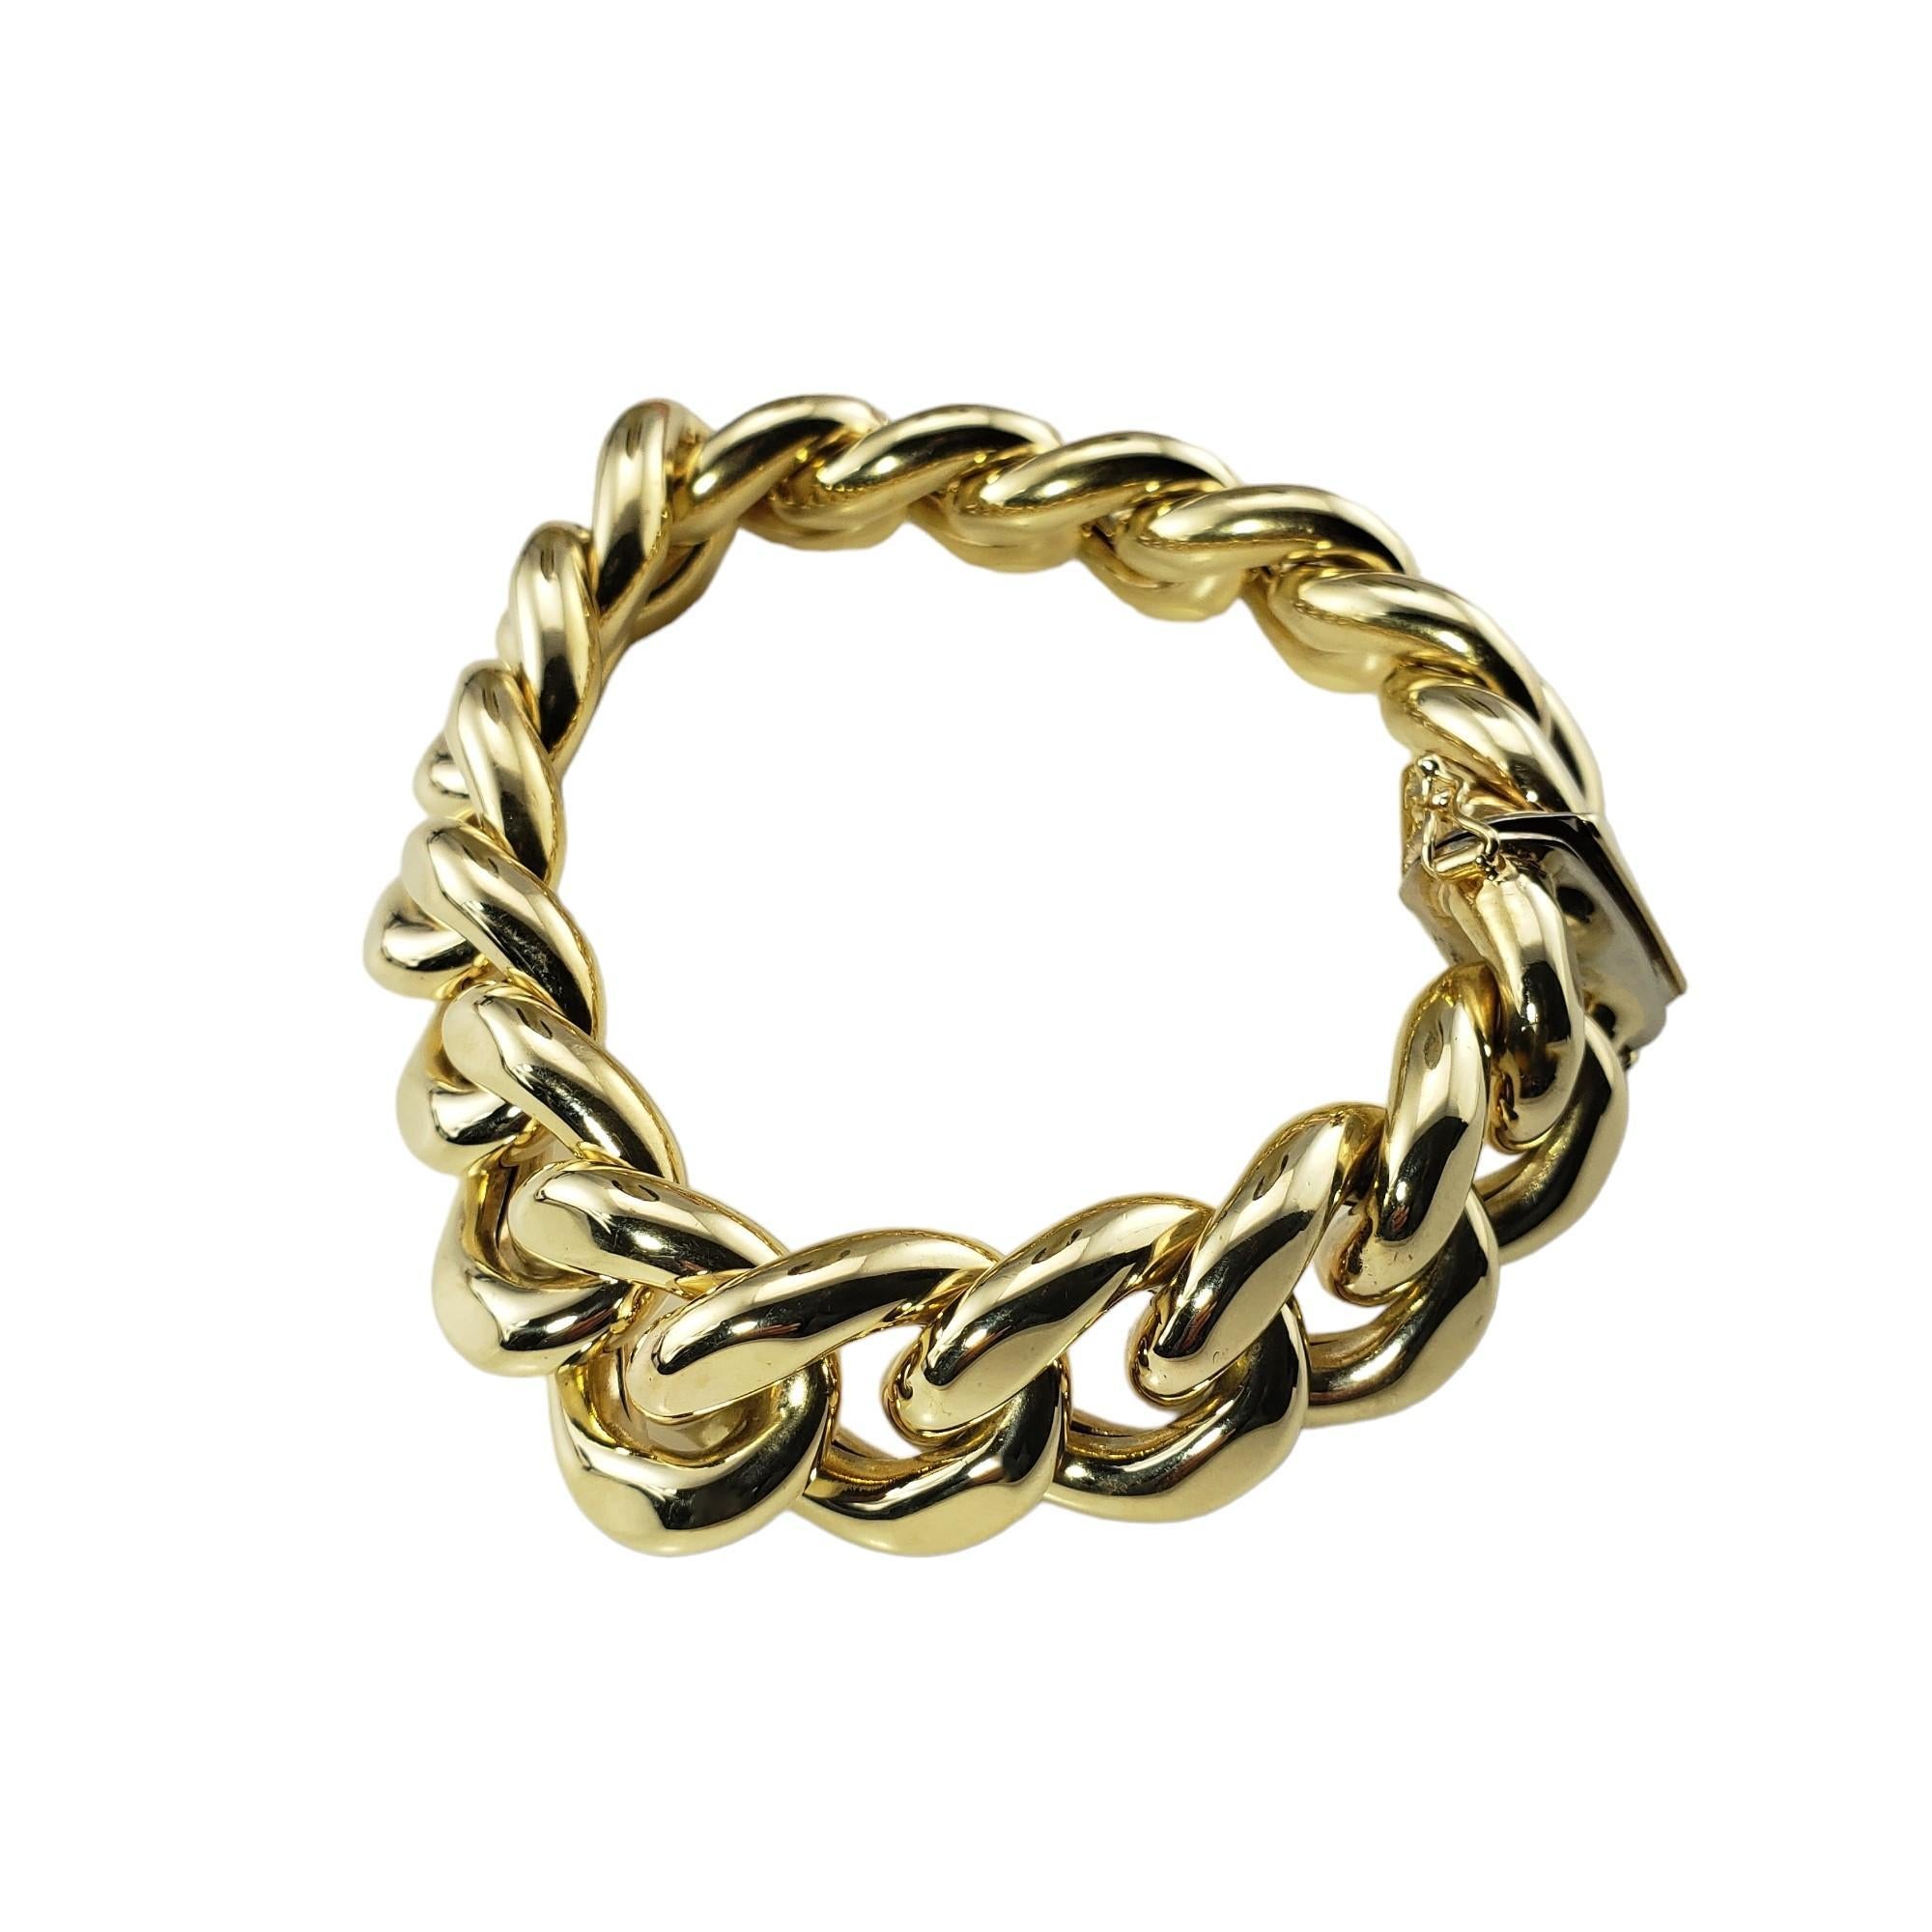 Vintage 14 Karat Yellow Gold Link Bracelet-

This elegant link bracelet is crafted in meticulously detailed 14K yellow gold.  Width:  17 mm.

Size: 7 inches

Stamped: 14K Italy

Weight: 52.8 gr./ 33.9 dwt.

Very good condition, professionally